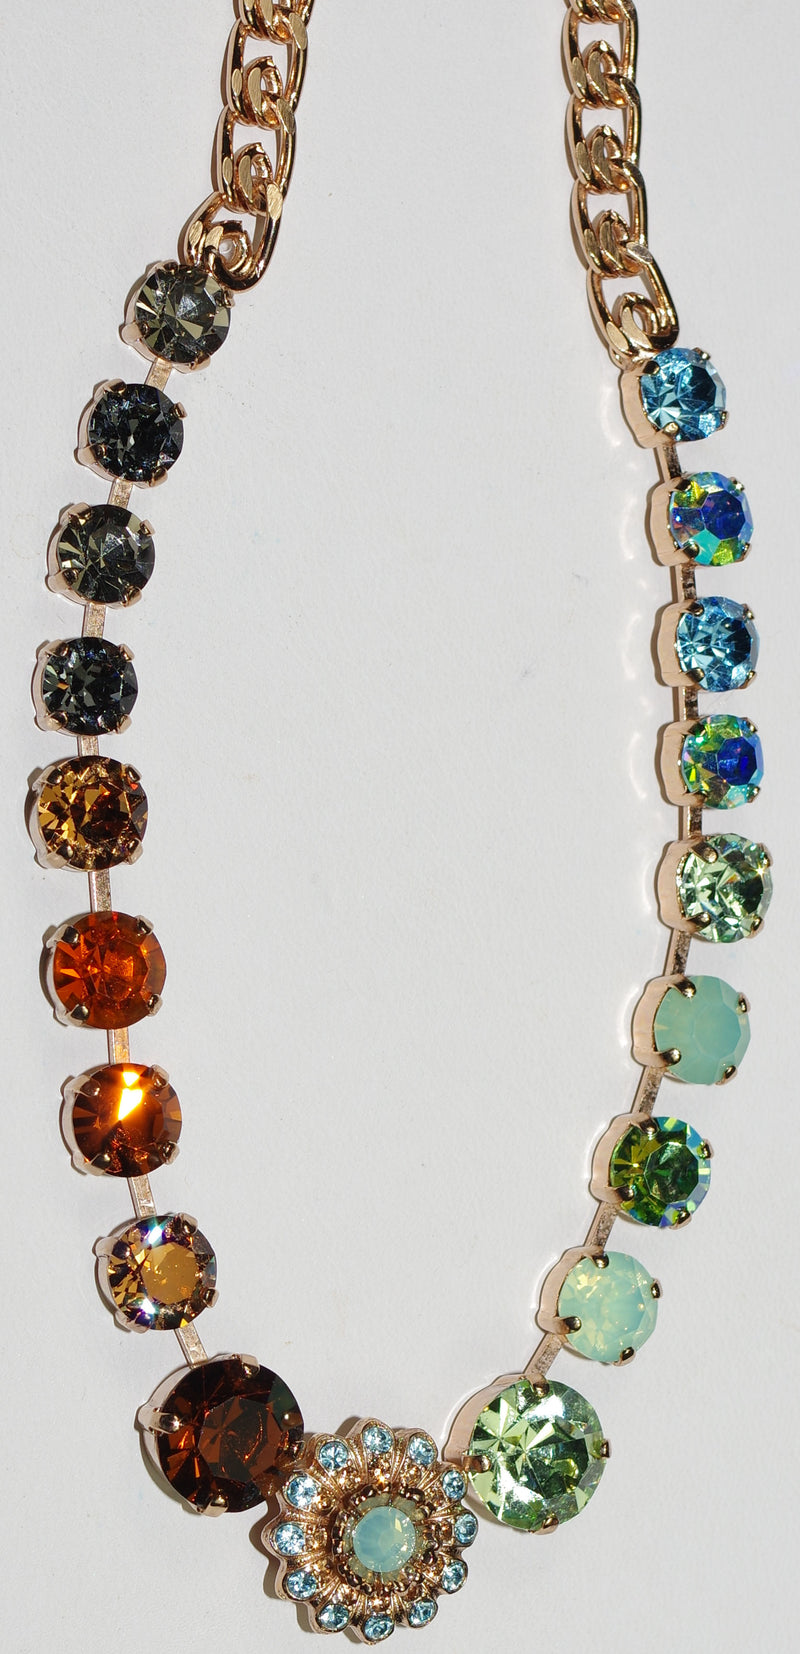 MARIANA NECKLACE FORGET ME NOT: amber, brown, blue, purple, green stones in rose gold setting, 18" adjustable chain